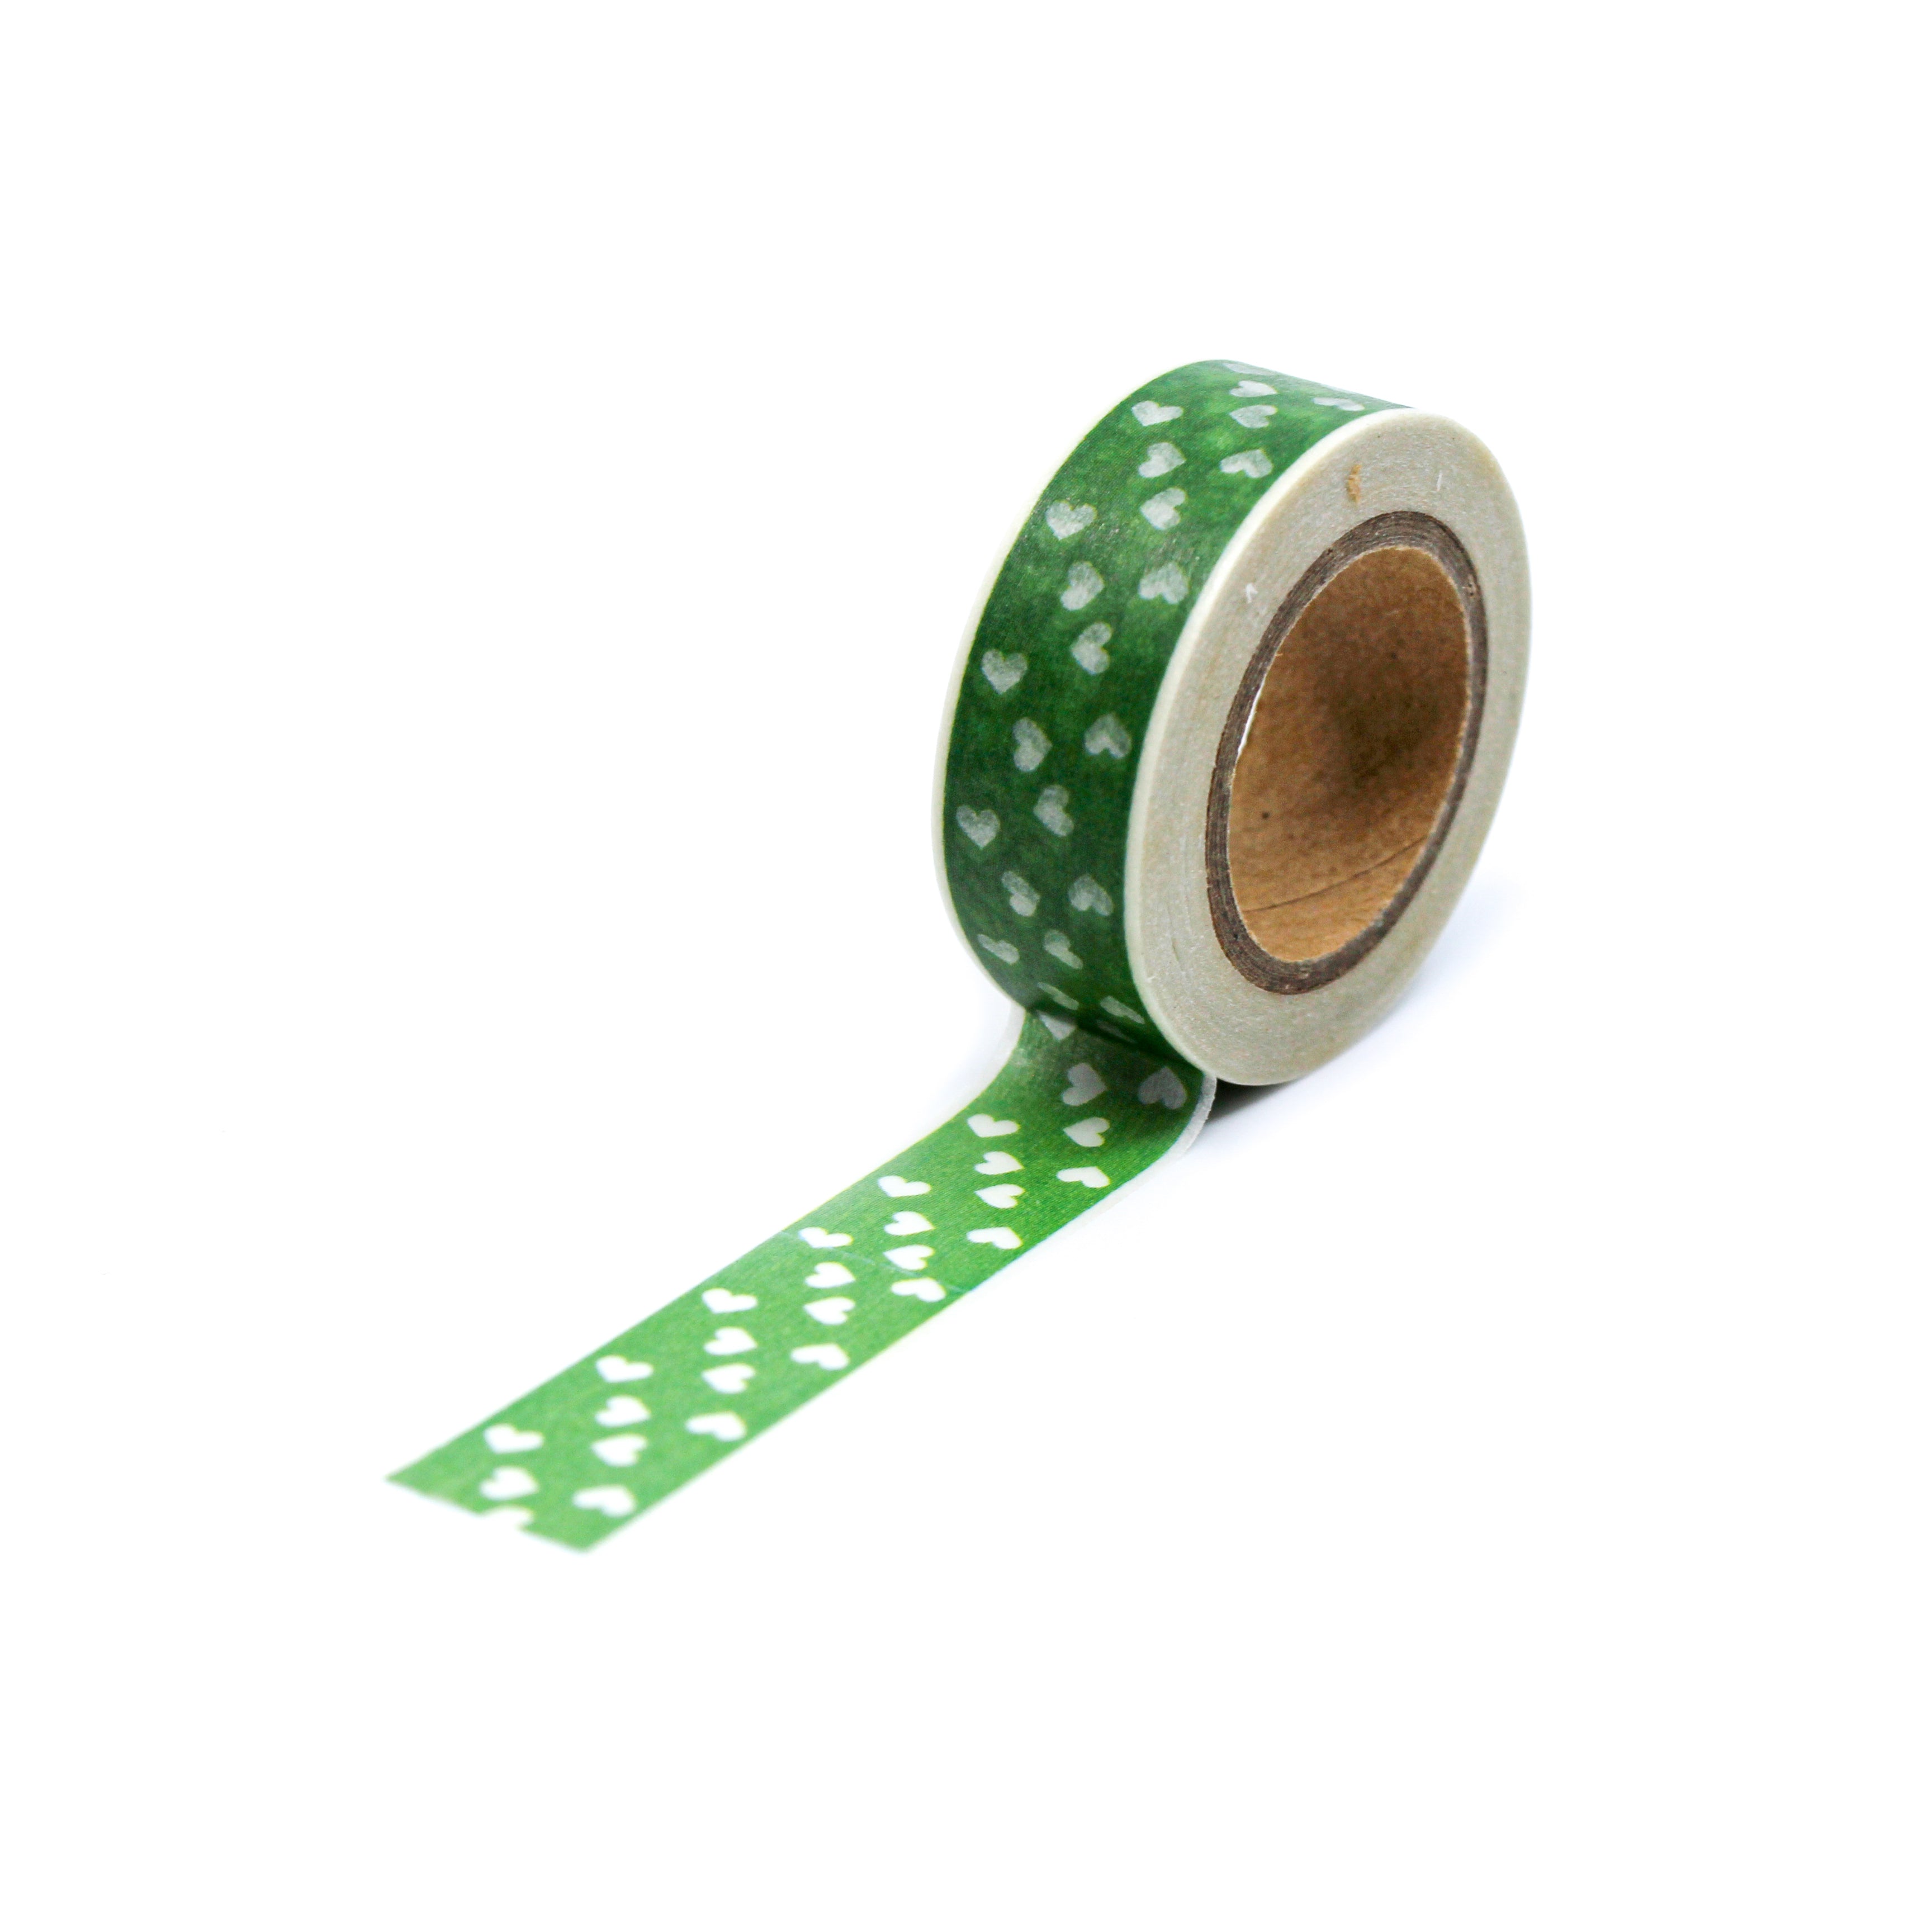 This is a full pattern repeat view of green multi hearts washi tape BBB Supplies Craft Shop